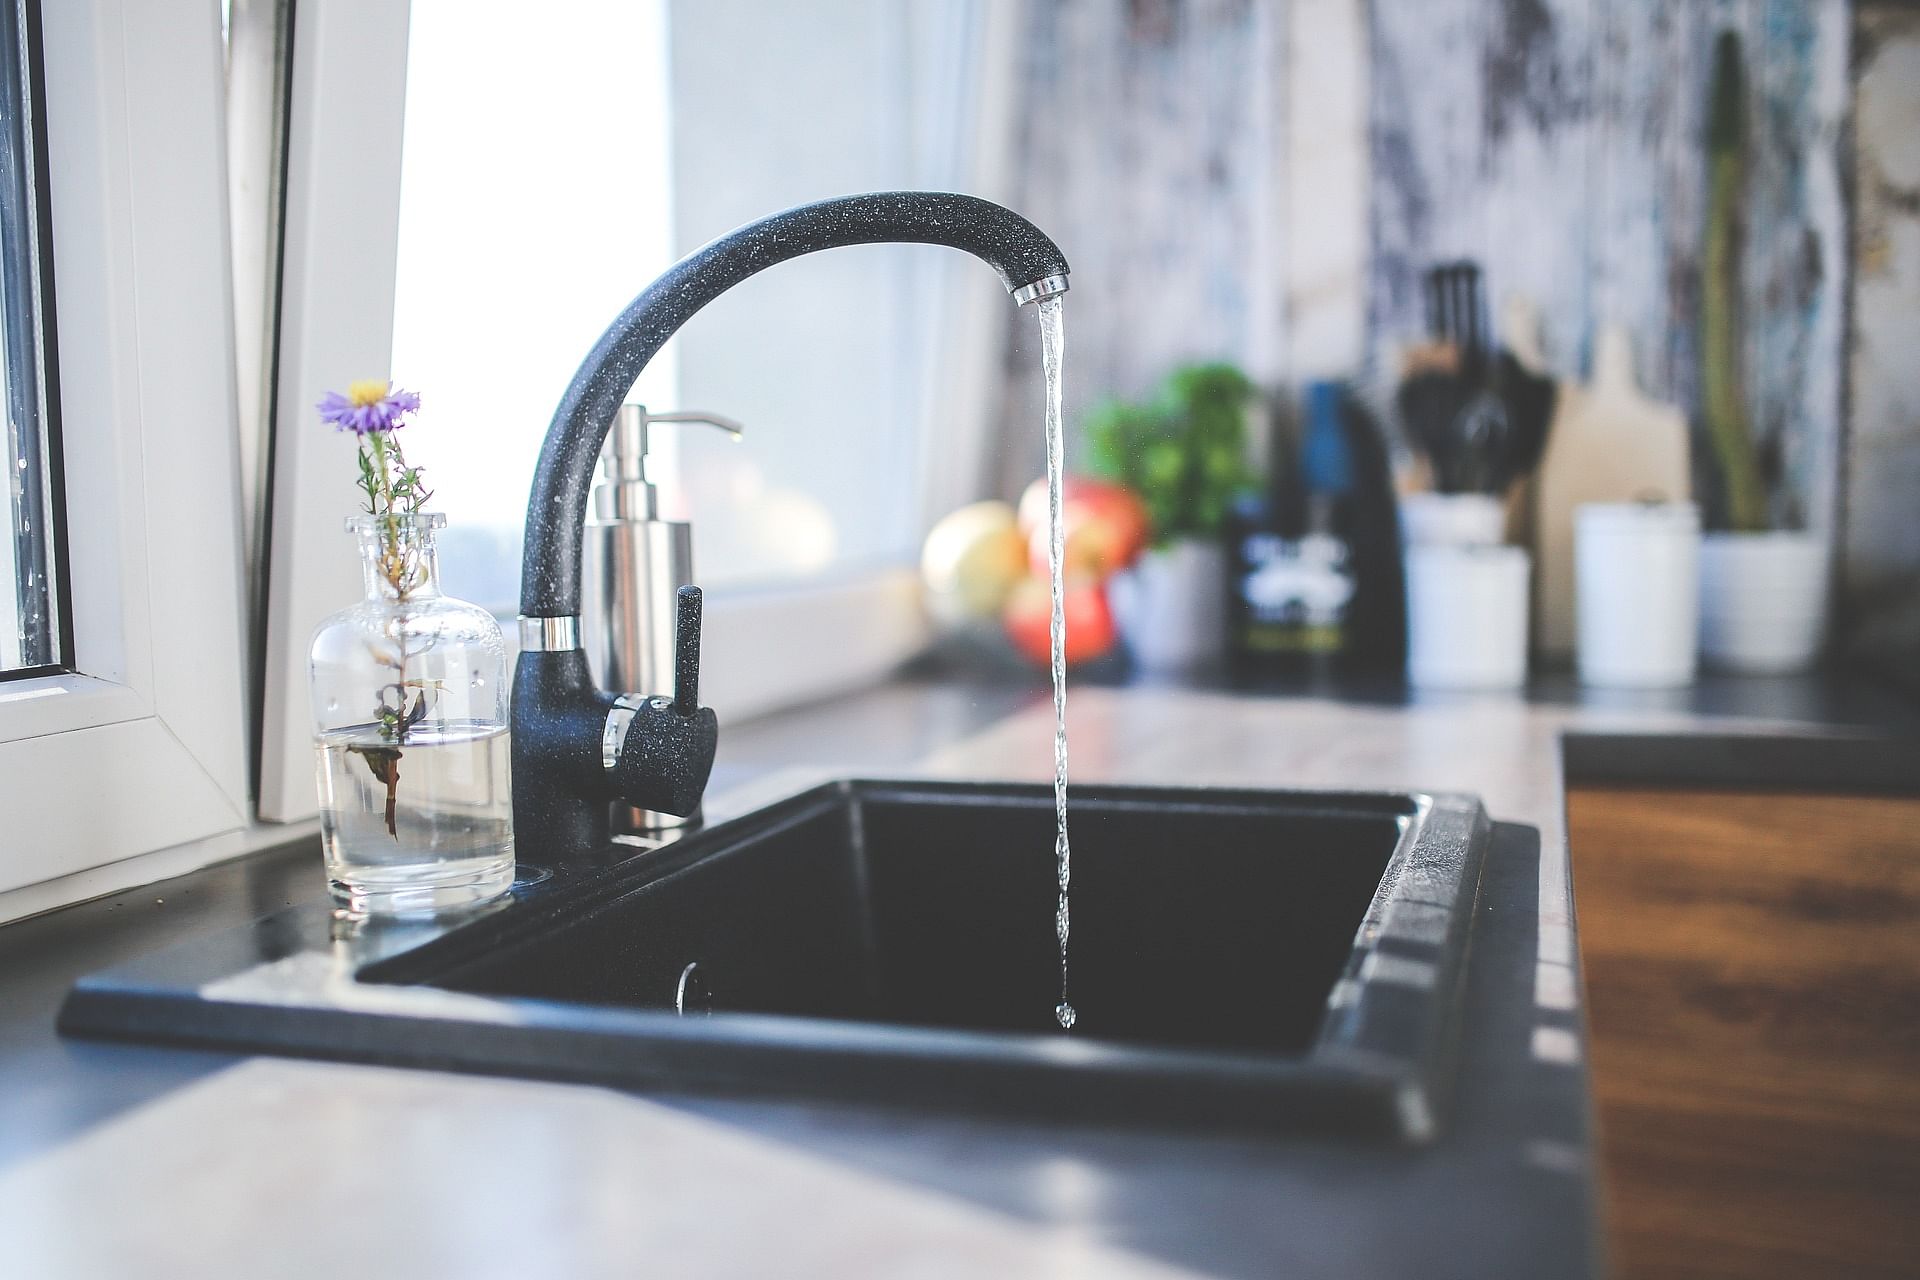 This Tippy Tap is operated with a peddle and helps avoid hand contact while using water. Credit: Pixabay Photo